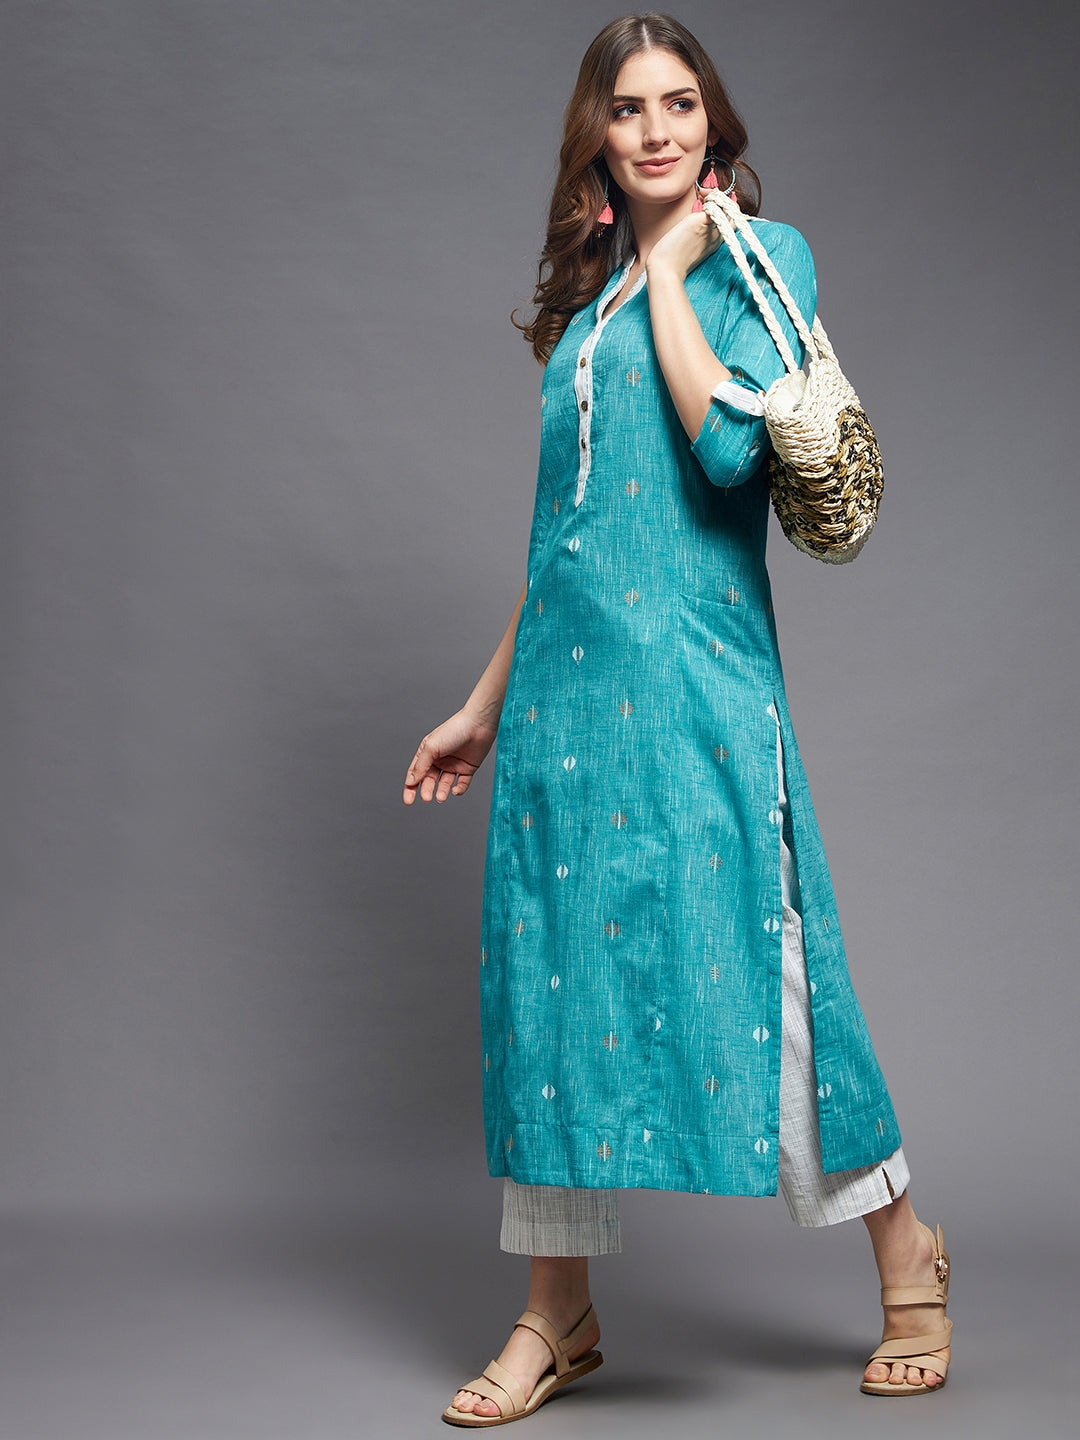 Pure South Cotton Kurti at Rs.849/Piece in surat offer by Global Enterprise